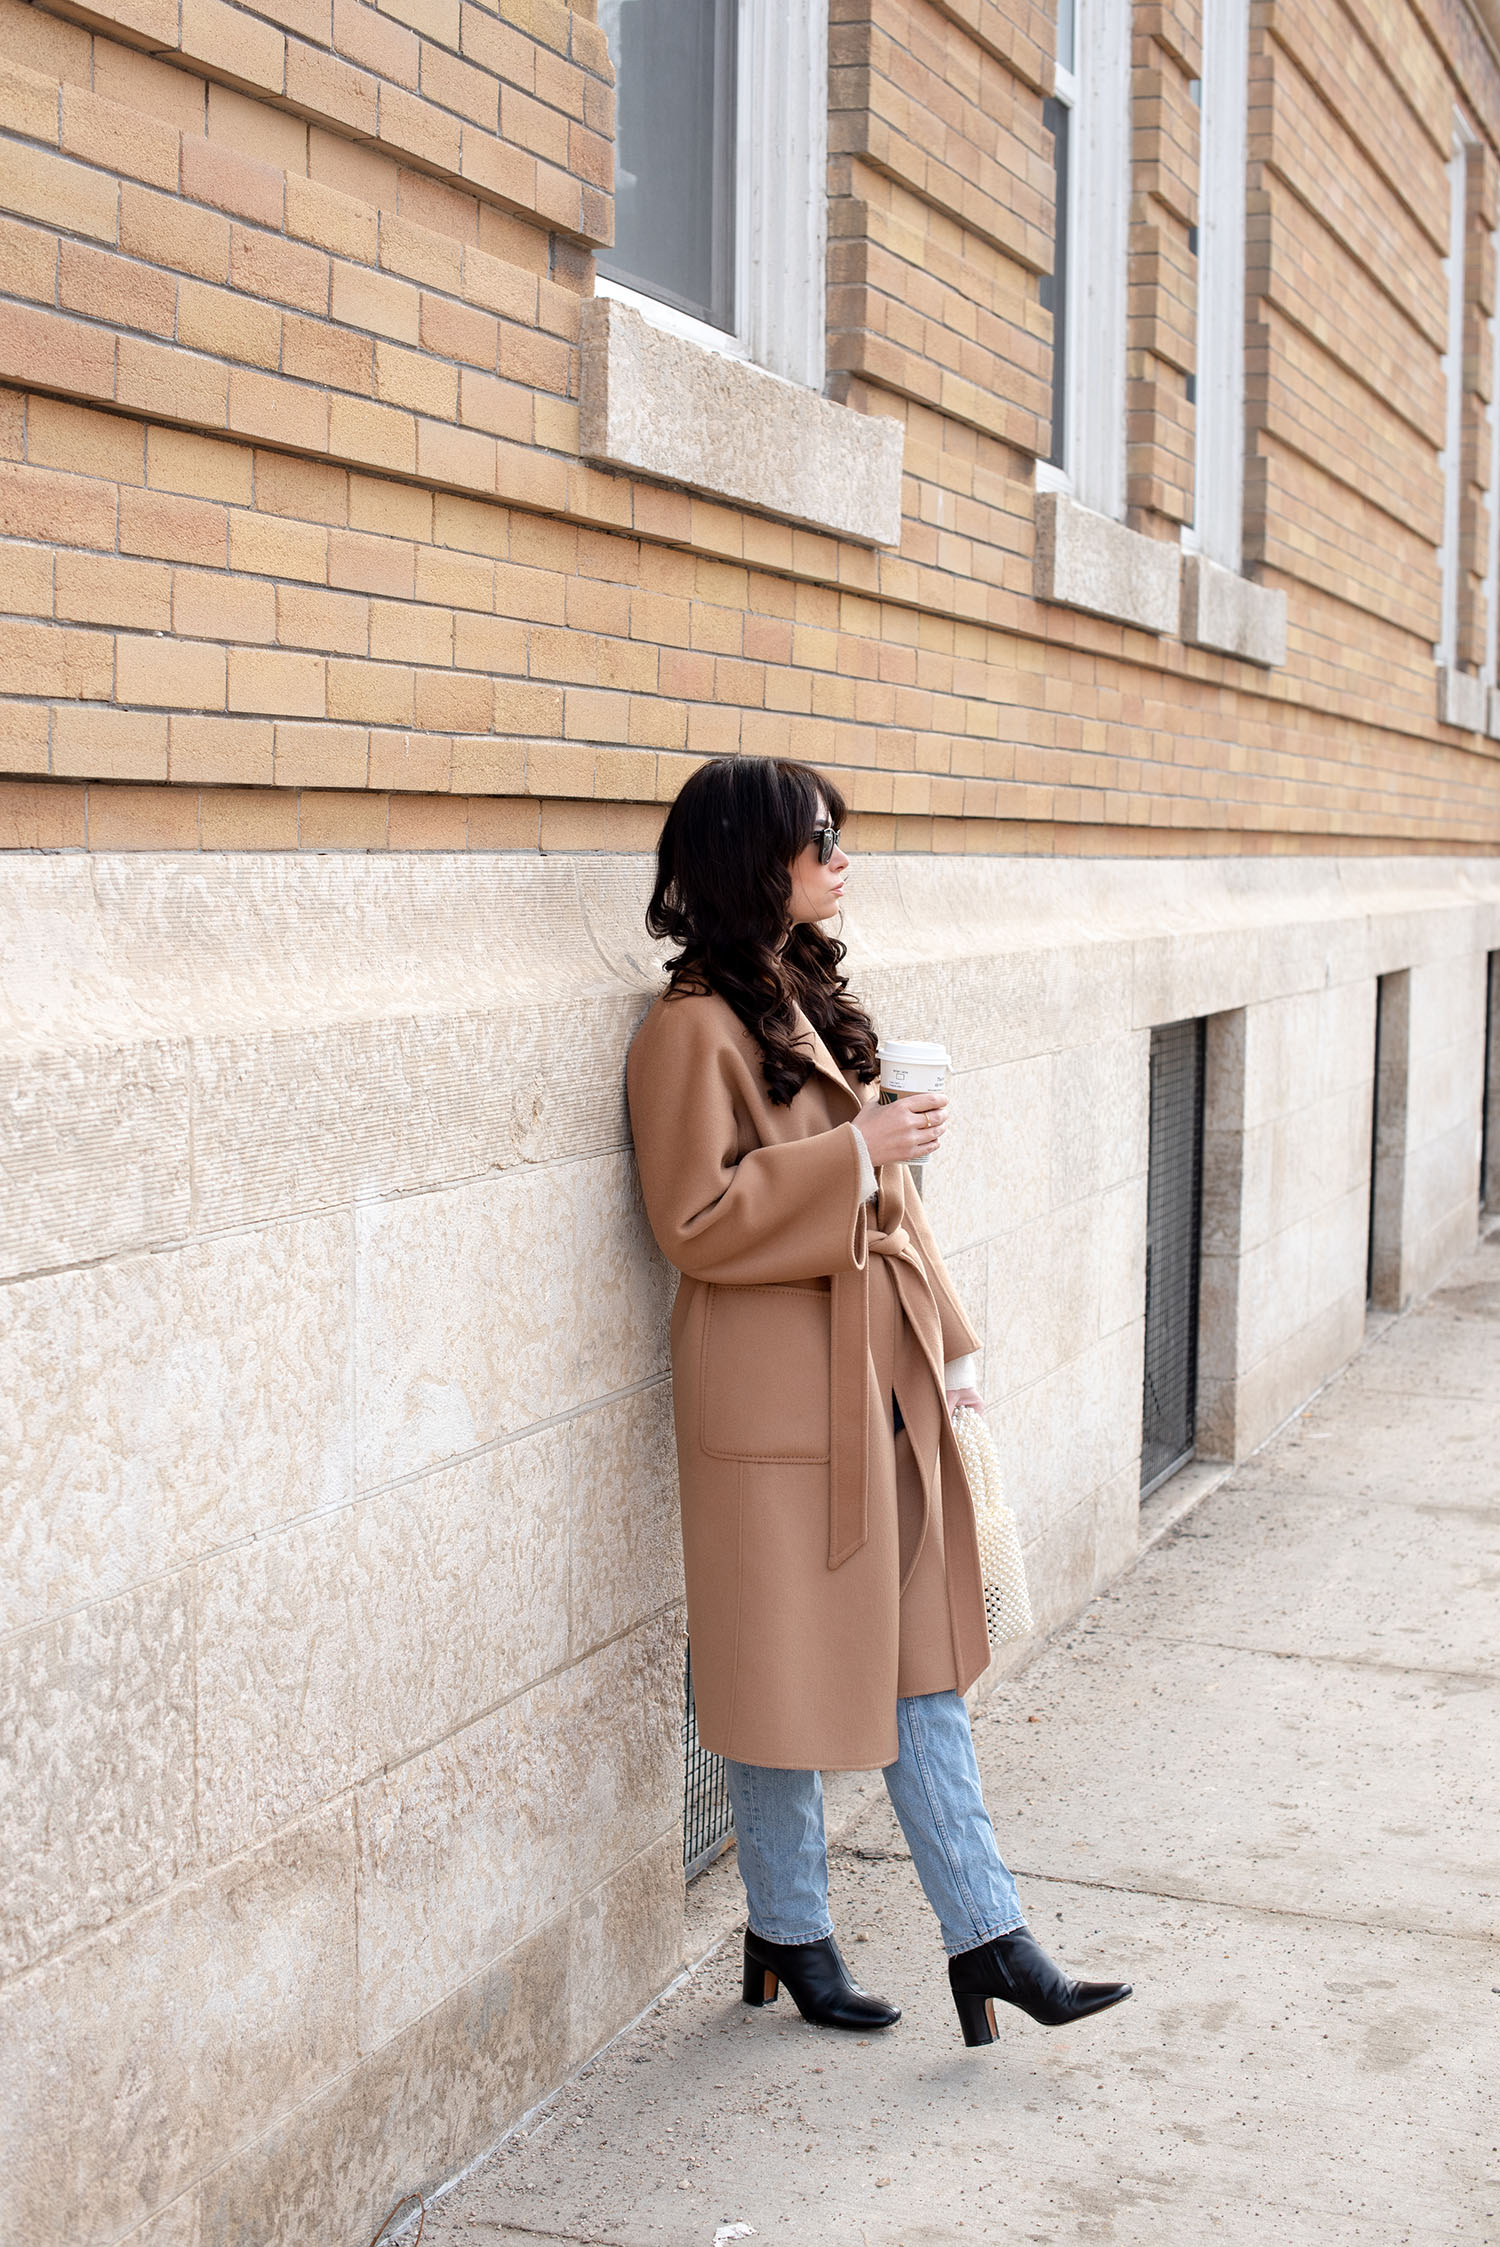 Coco & Vera - Zara jeans, Rouje boots, The Curated coat